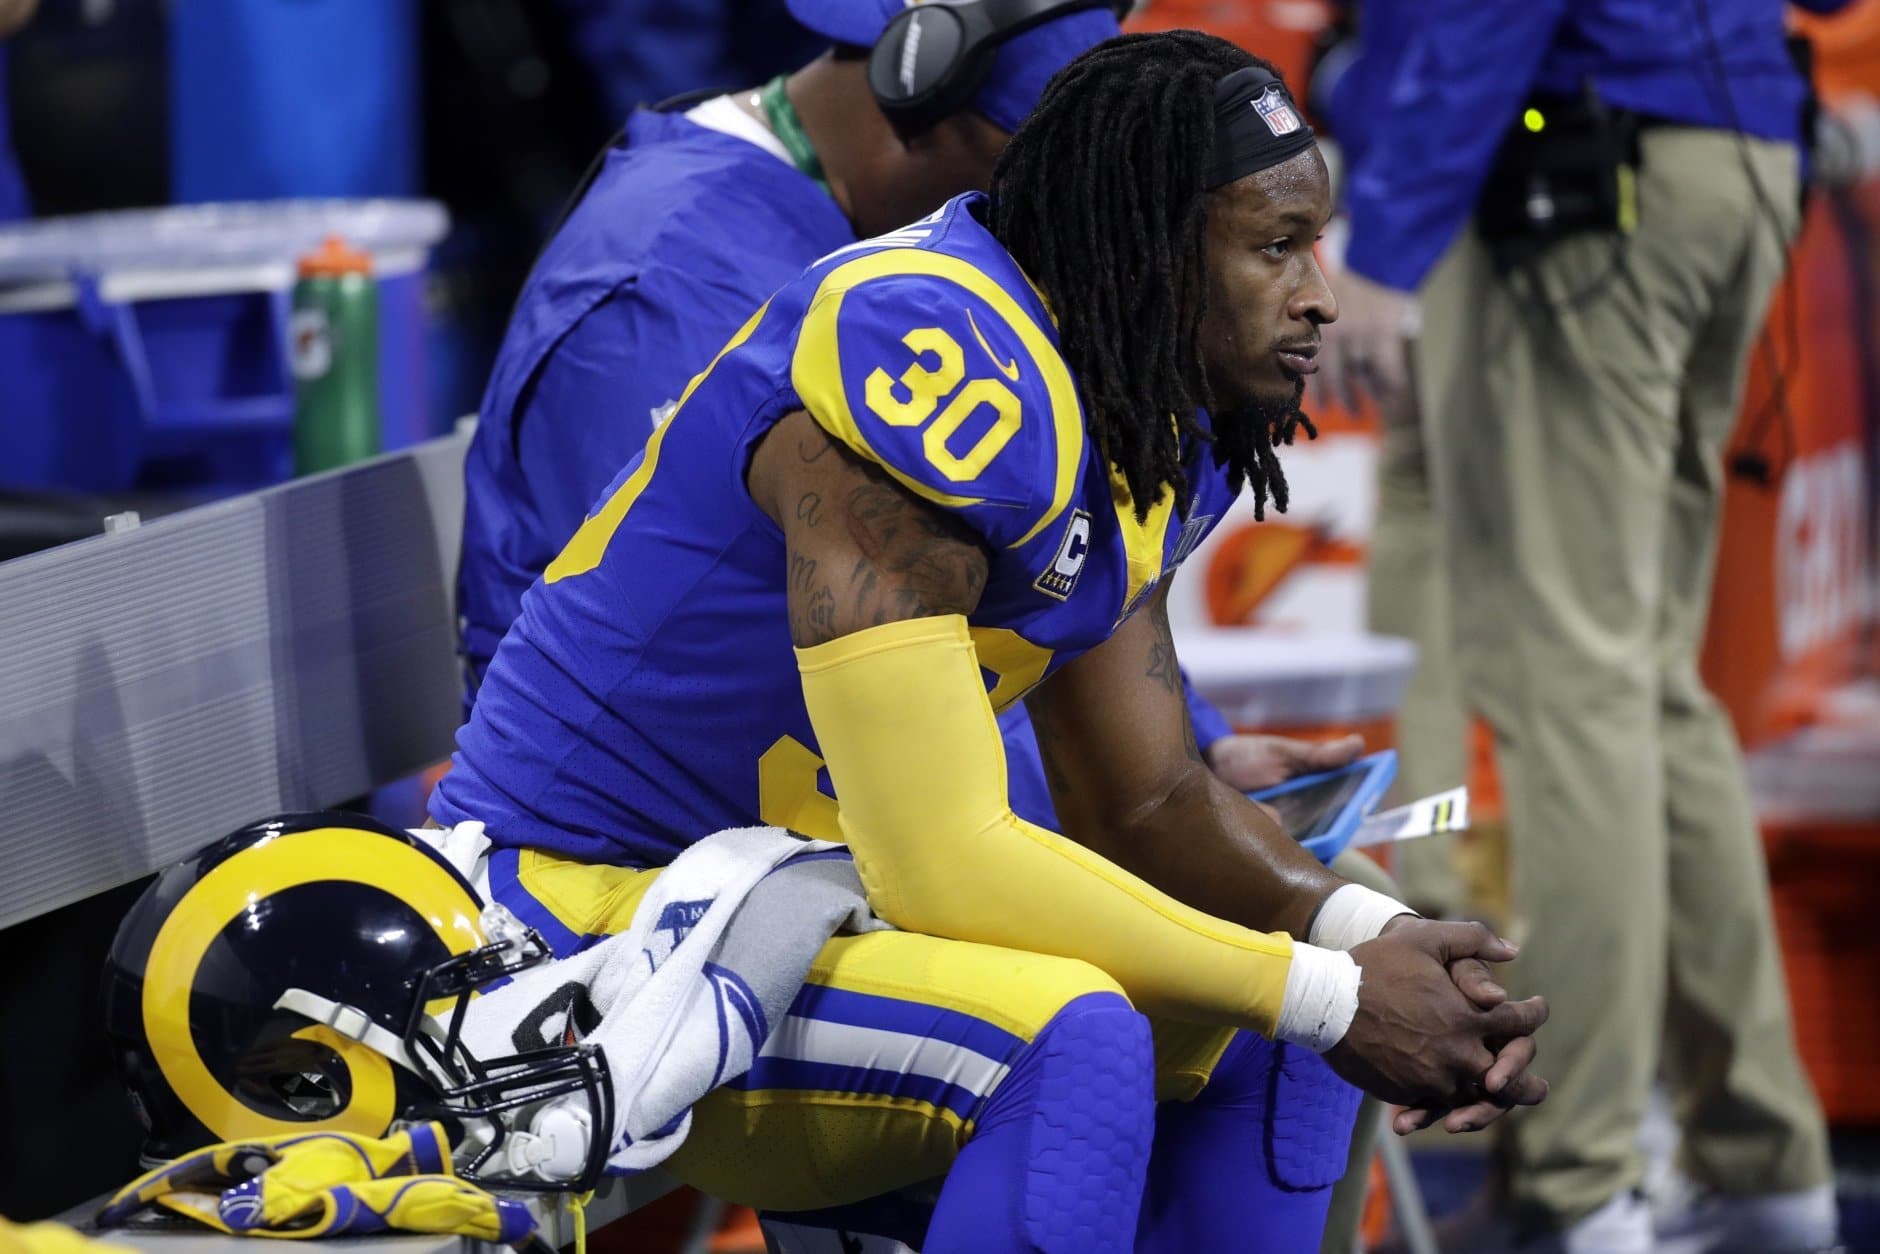 Los Angeles Rams' Todd Gurley II watches from the bench during the first half of the NFL Super Bowl 53 football game against the New England Patriots, Sunday, Feb. 3, 2019, in Atlanta. (AP Photo/Patrick Semansky)